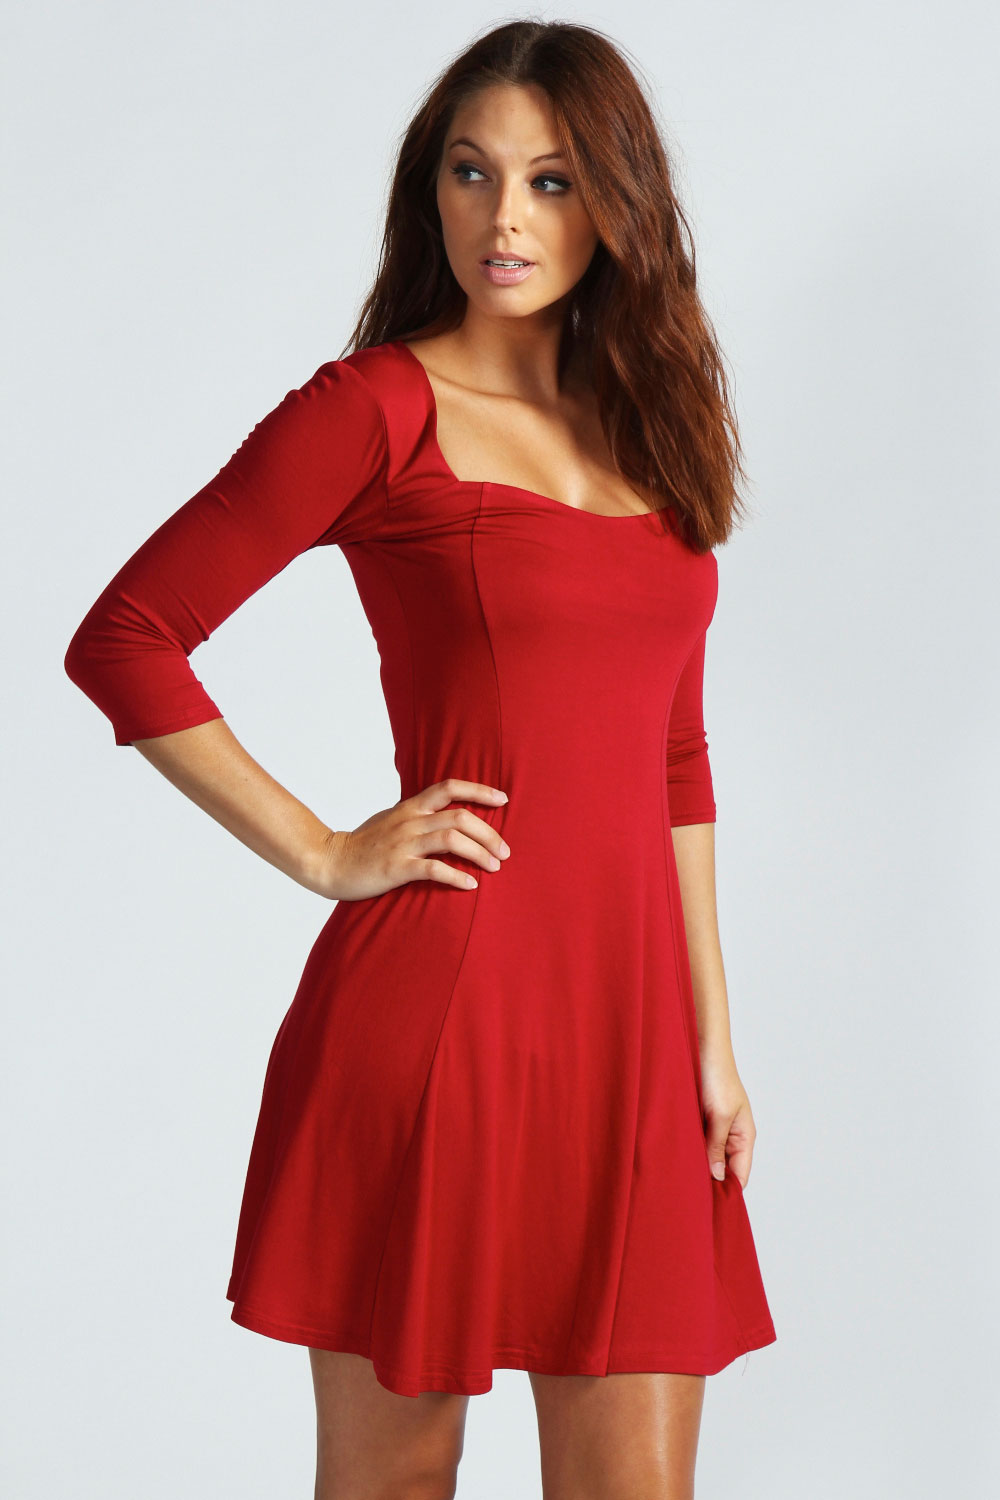 Red Skater Dress Picture Collection | Dressed Up Girl